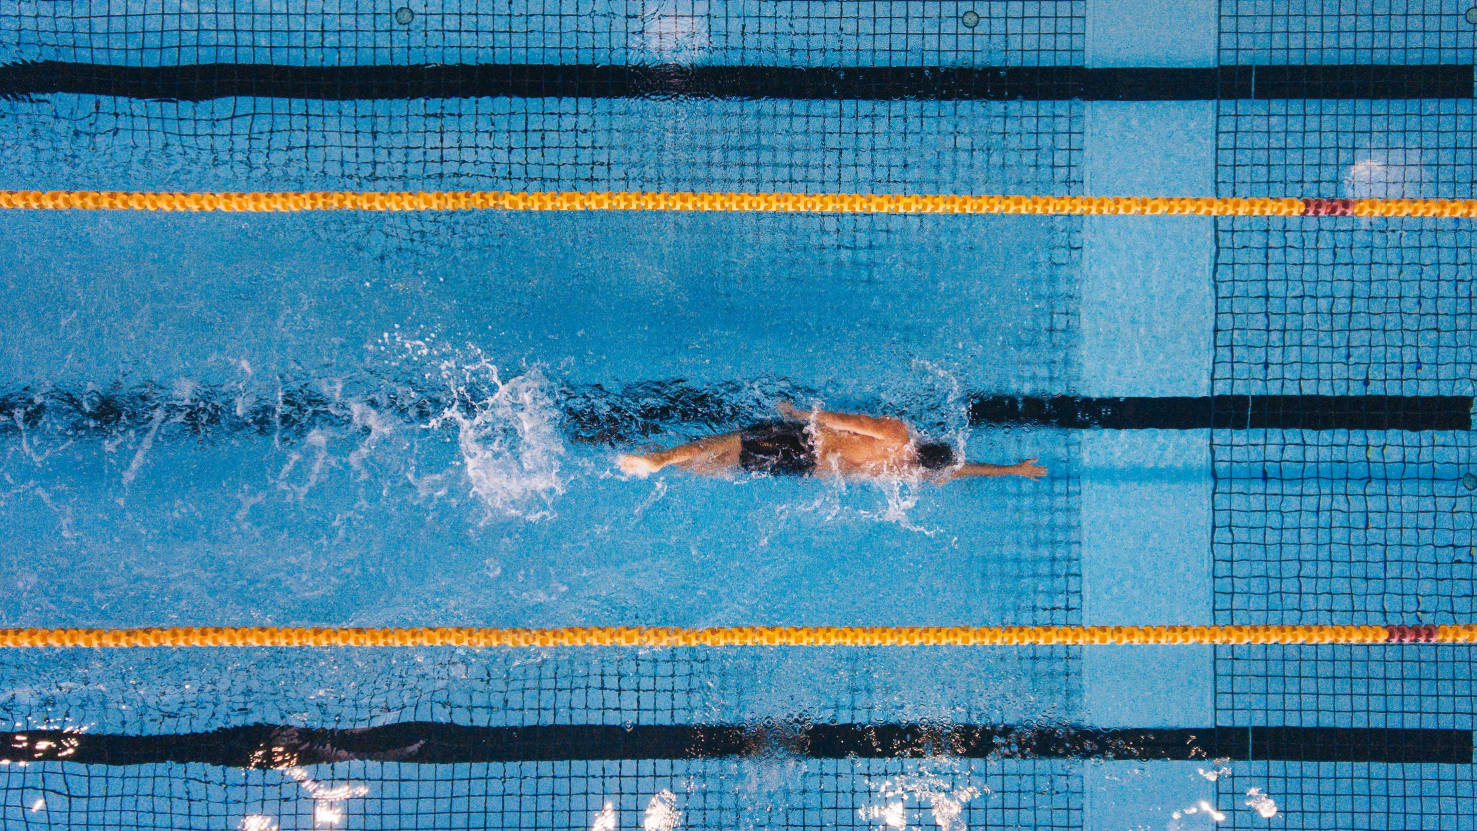 person swimming laps in a pool, showing good lung health